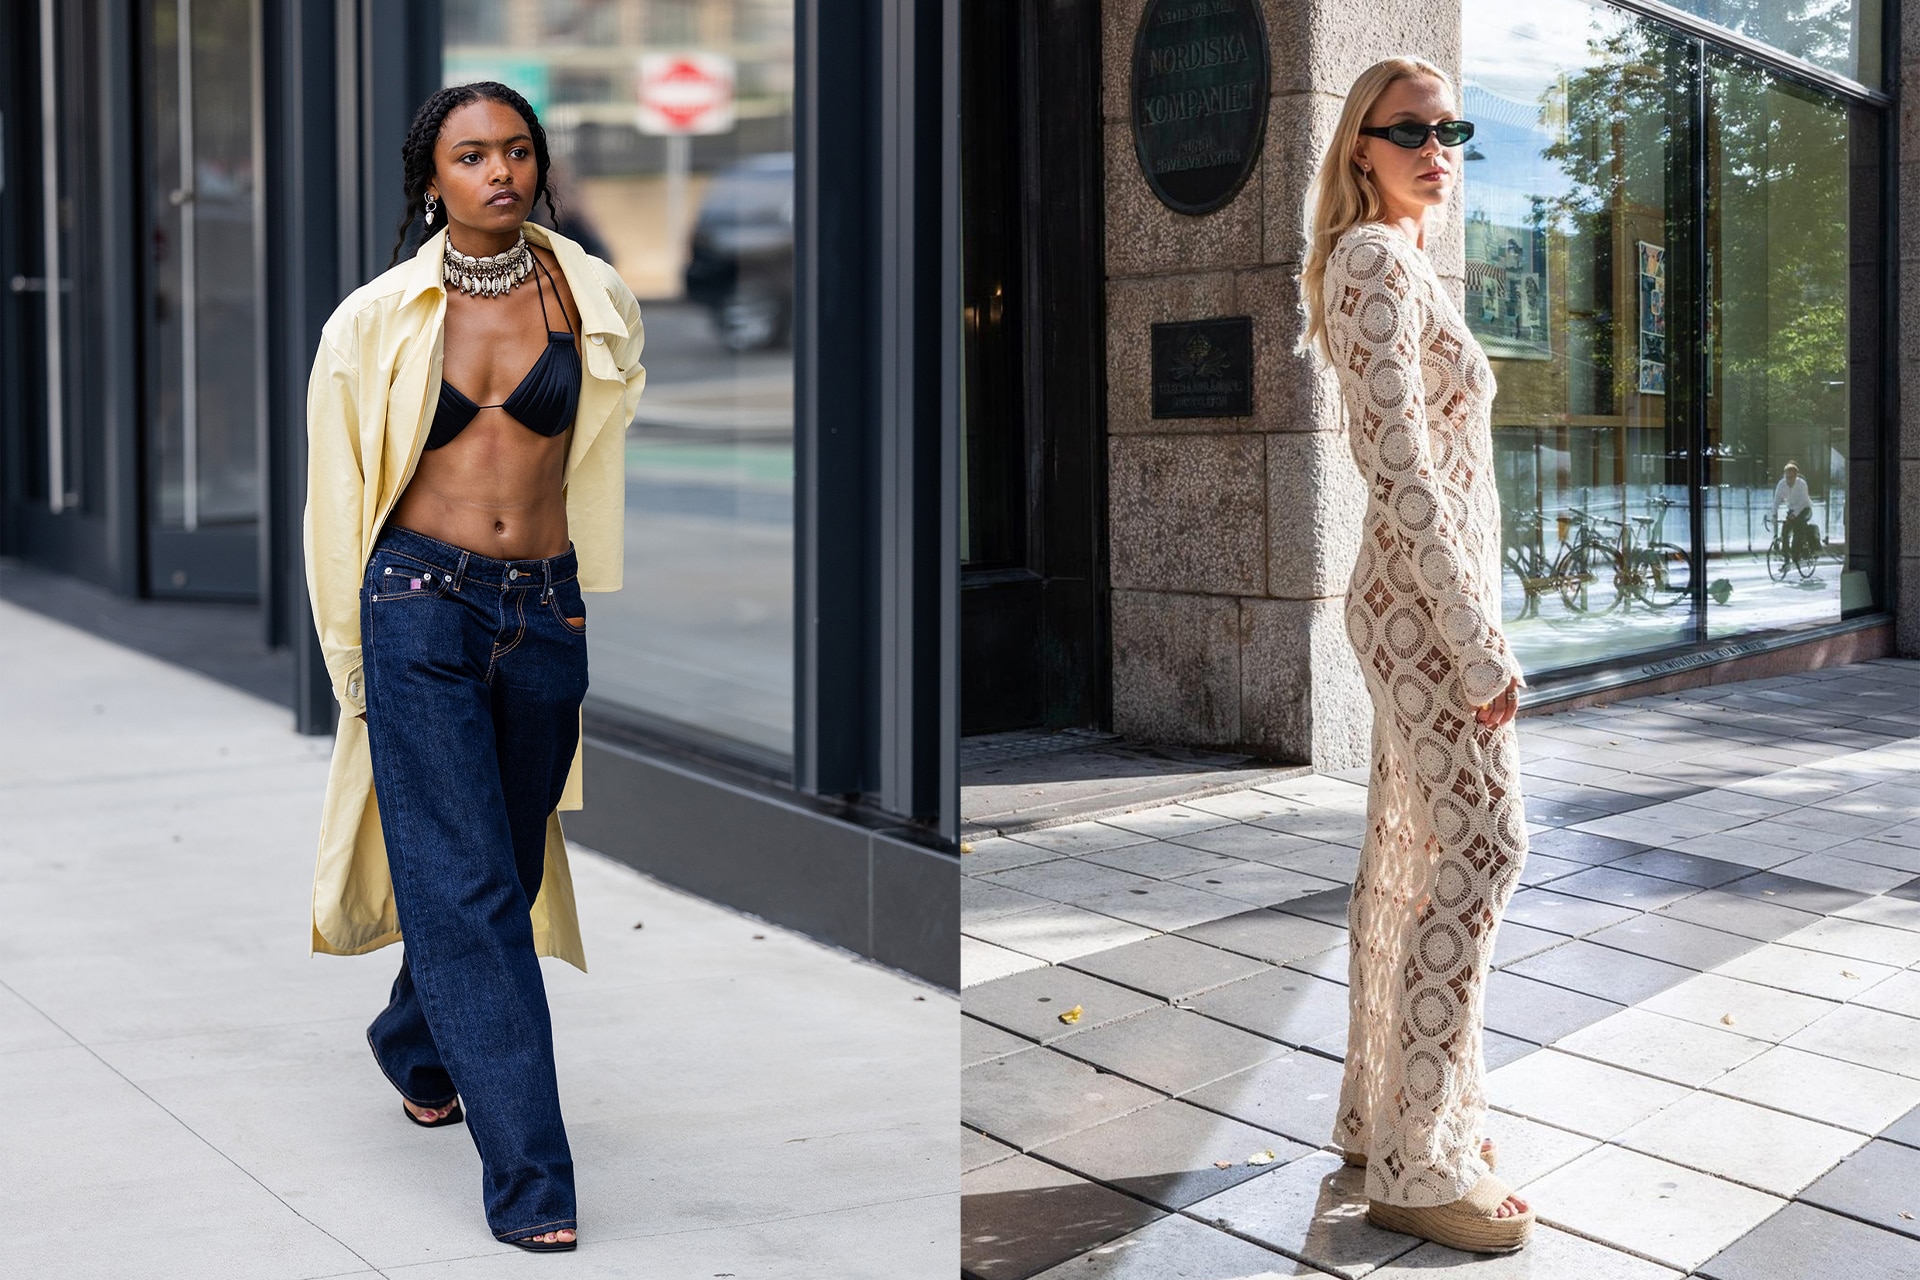 21 Stylish Ideas for How to Wear a Bralette